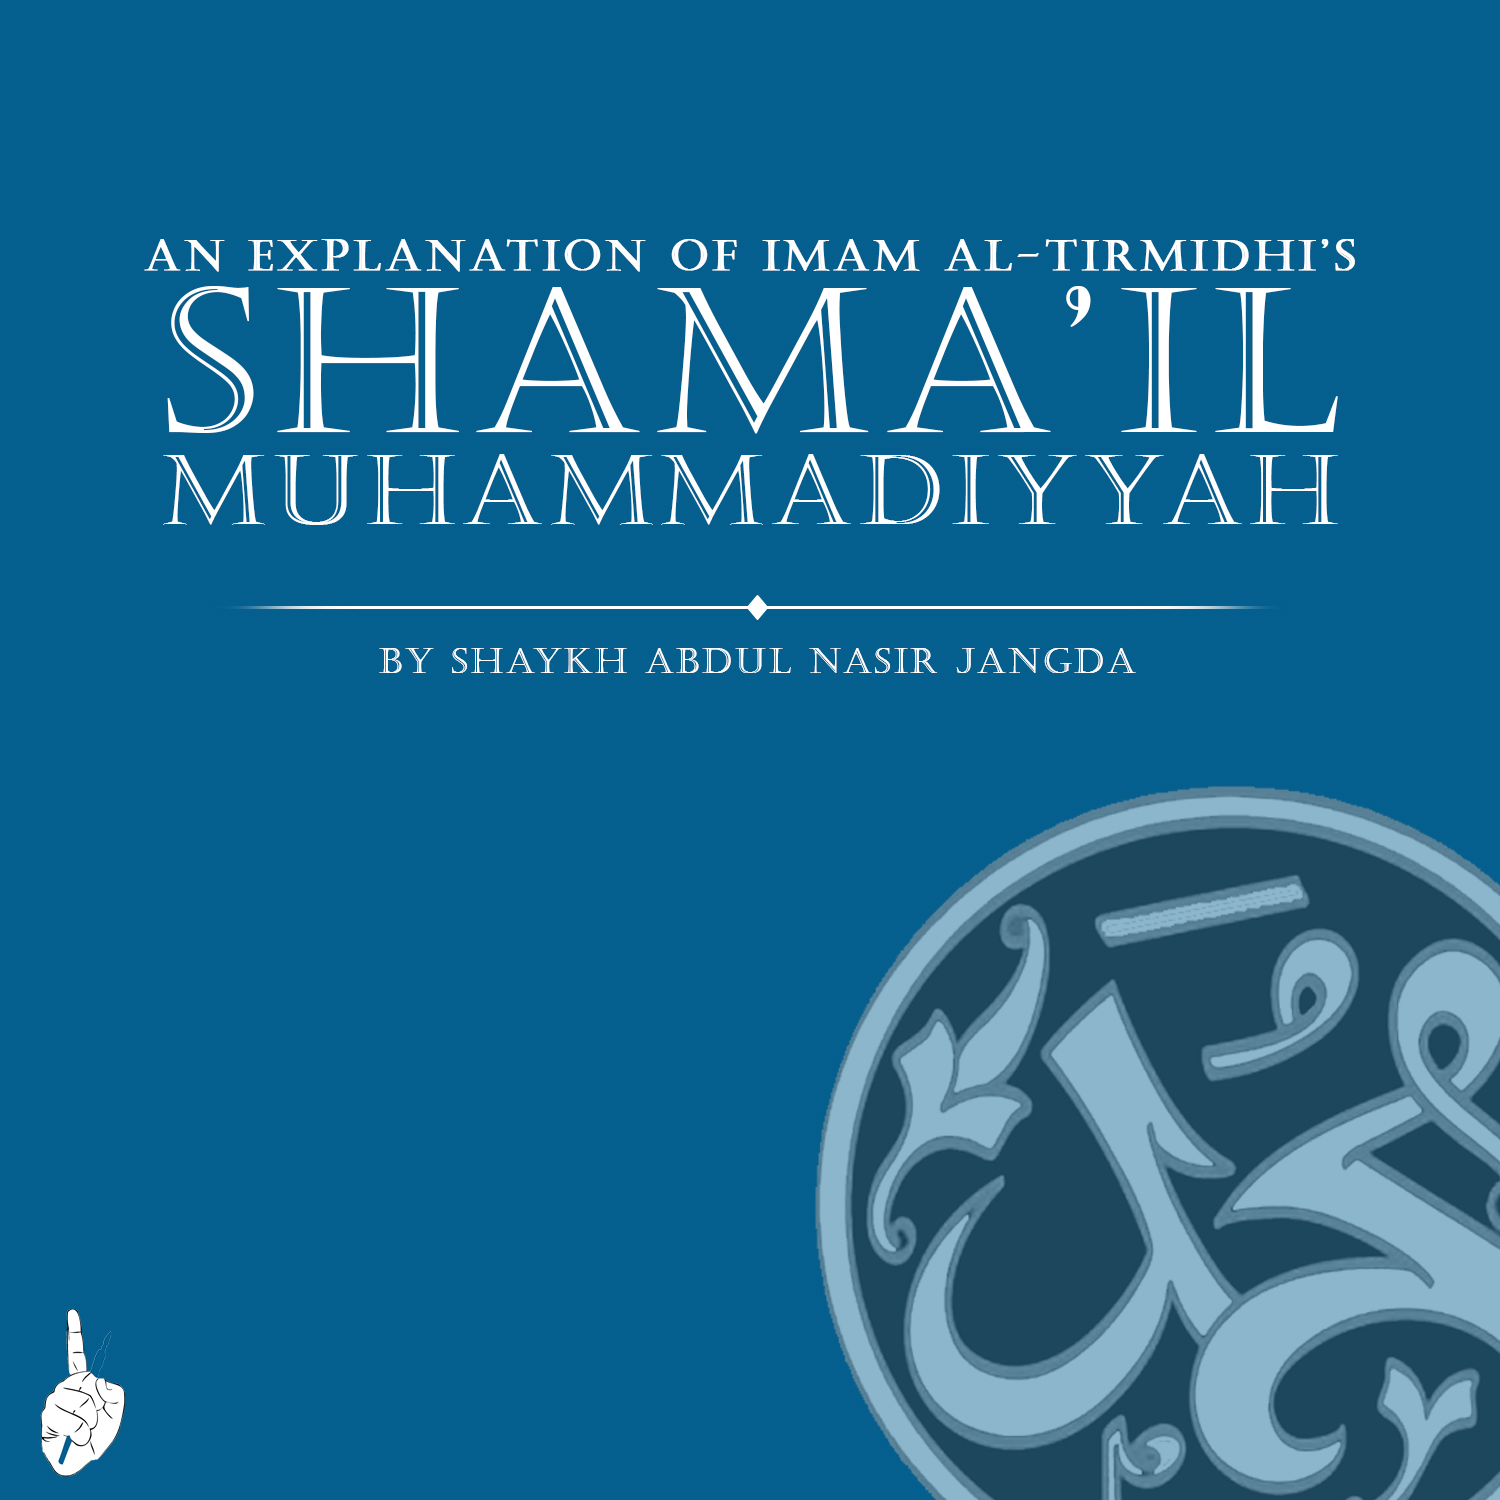 Shama’il Muhammadiyyah: EP2 – The Physical Features of the Prophet Part 2